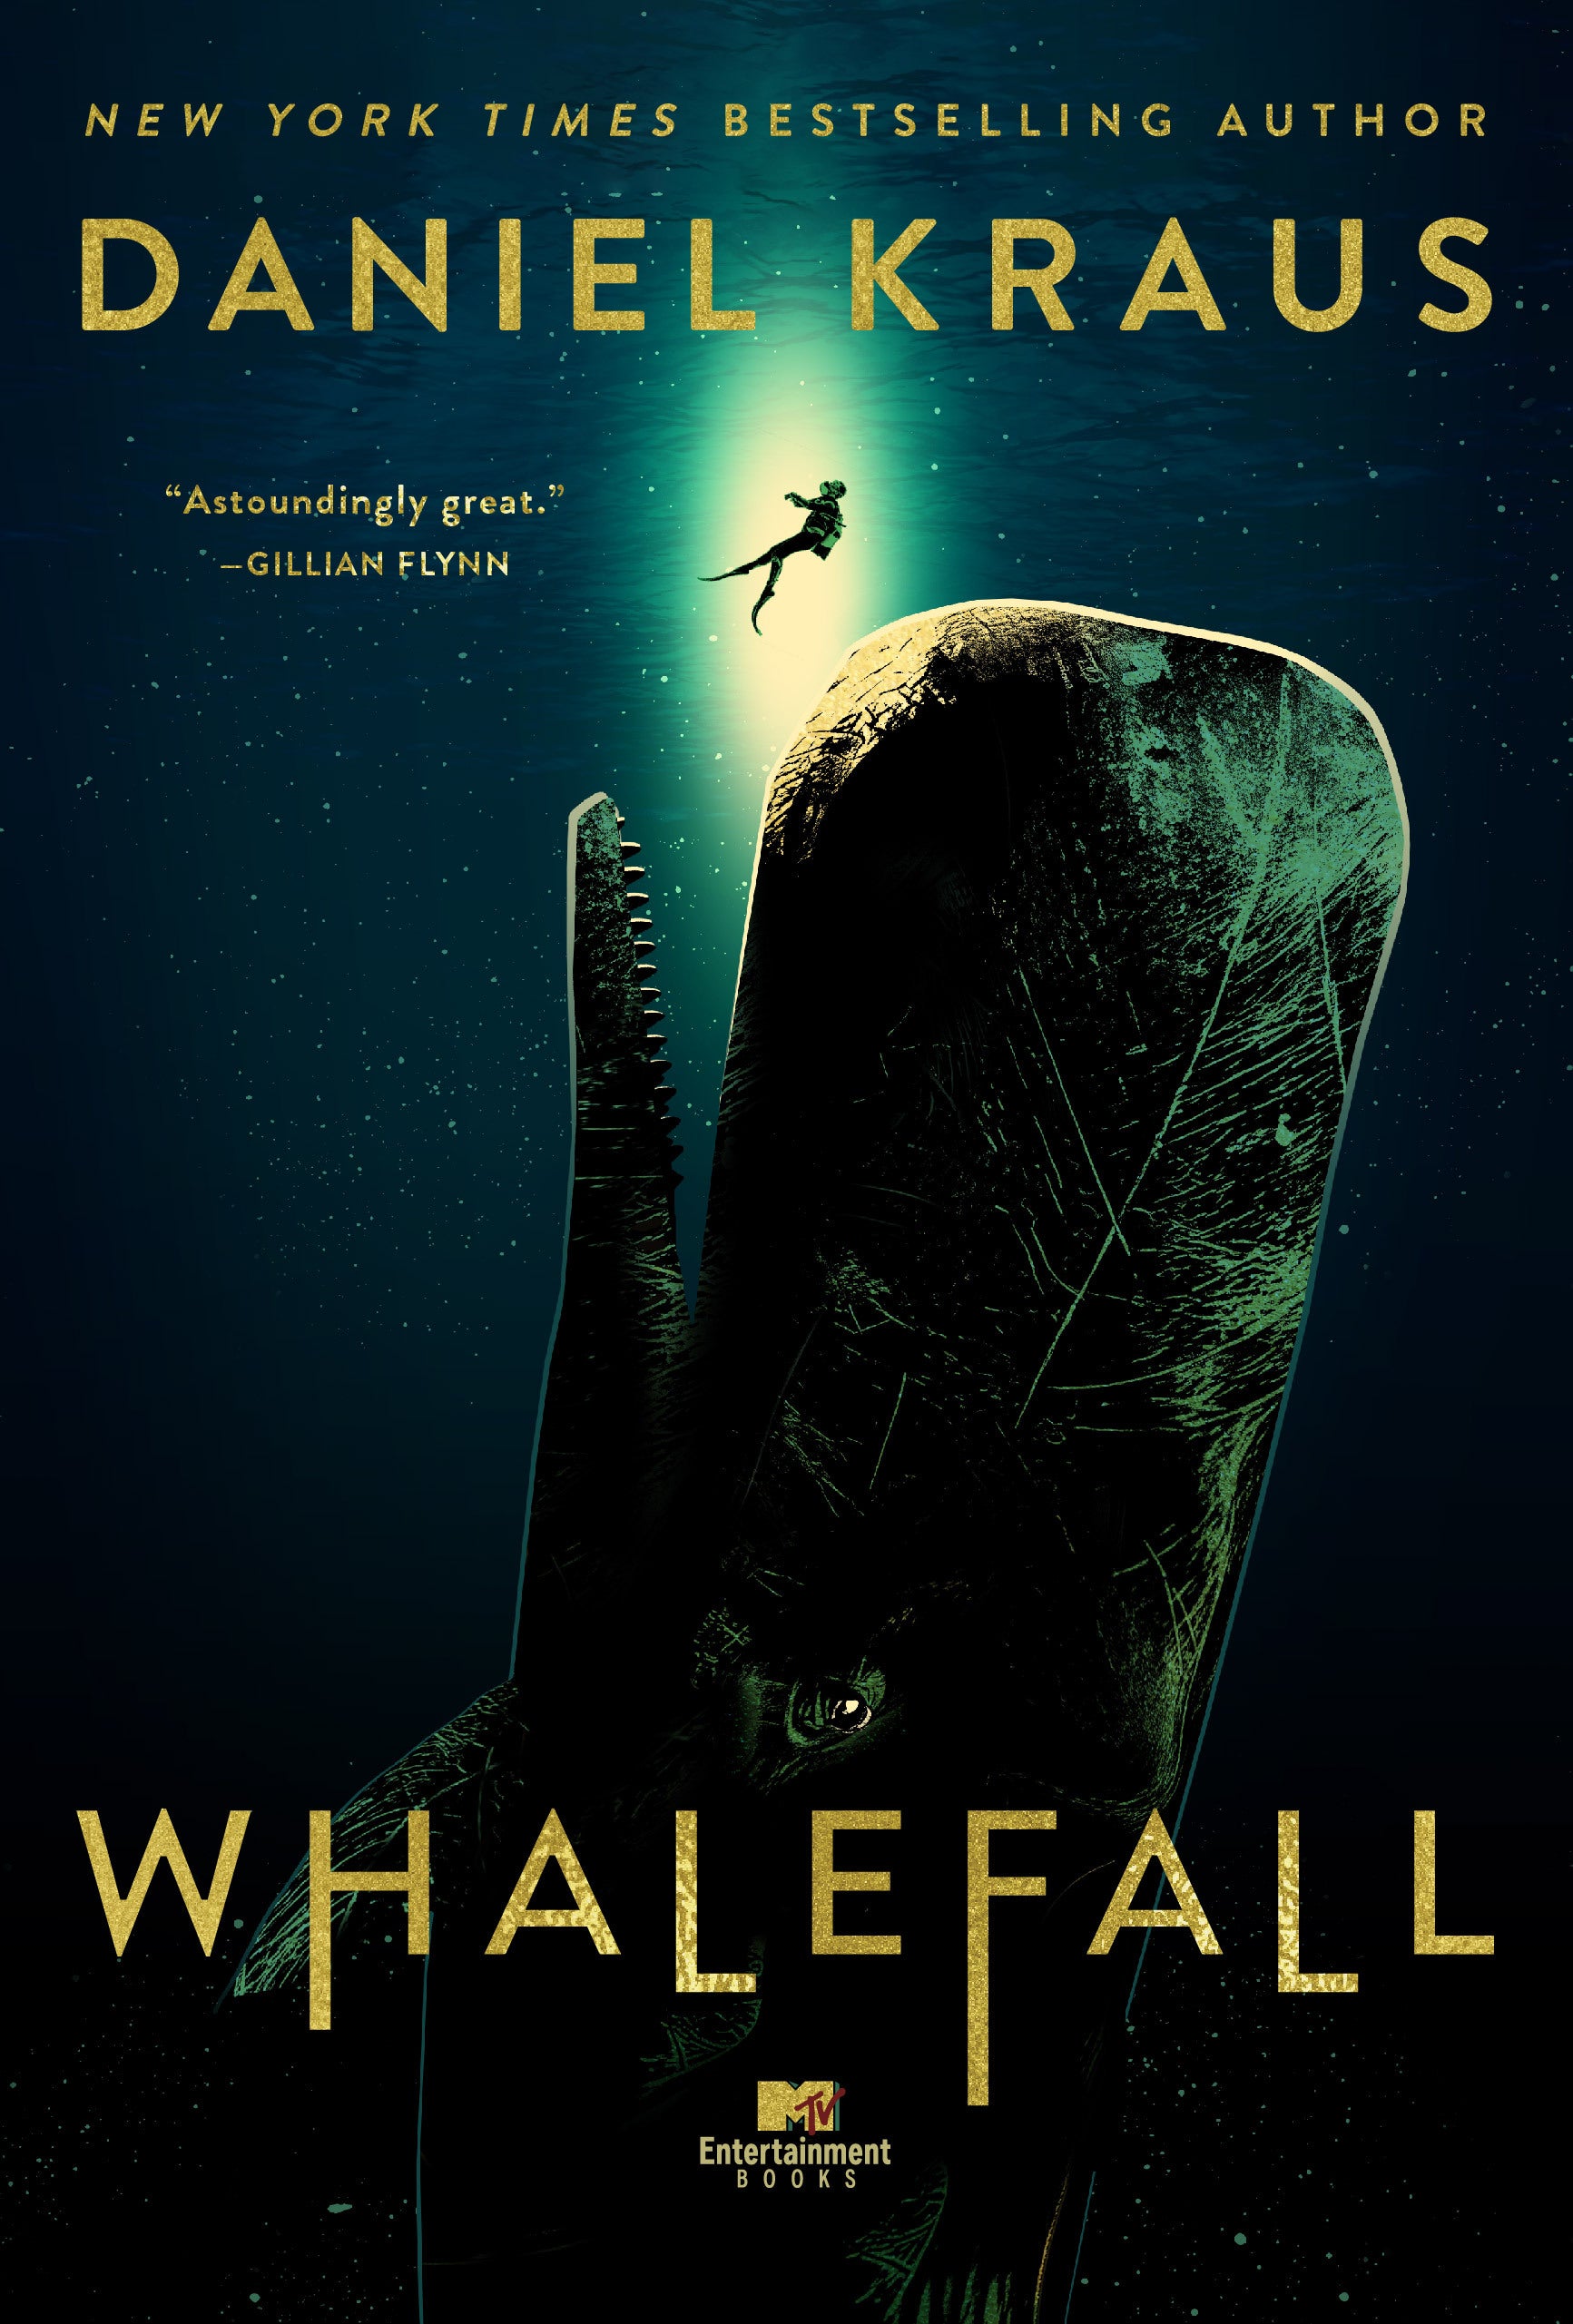 Whalefall Relates a Primal Oceanic Fear Come True